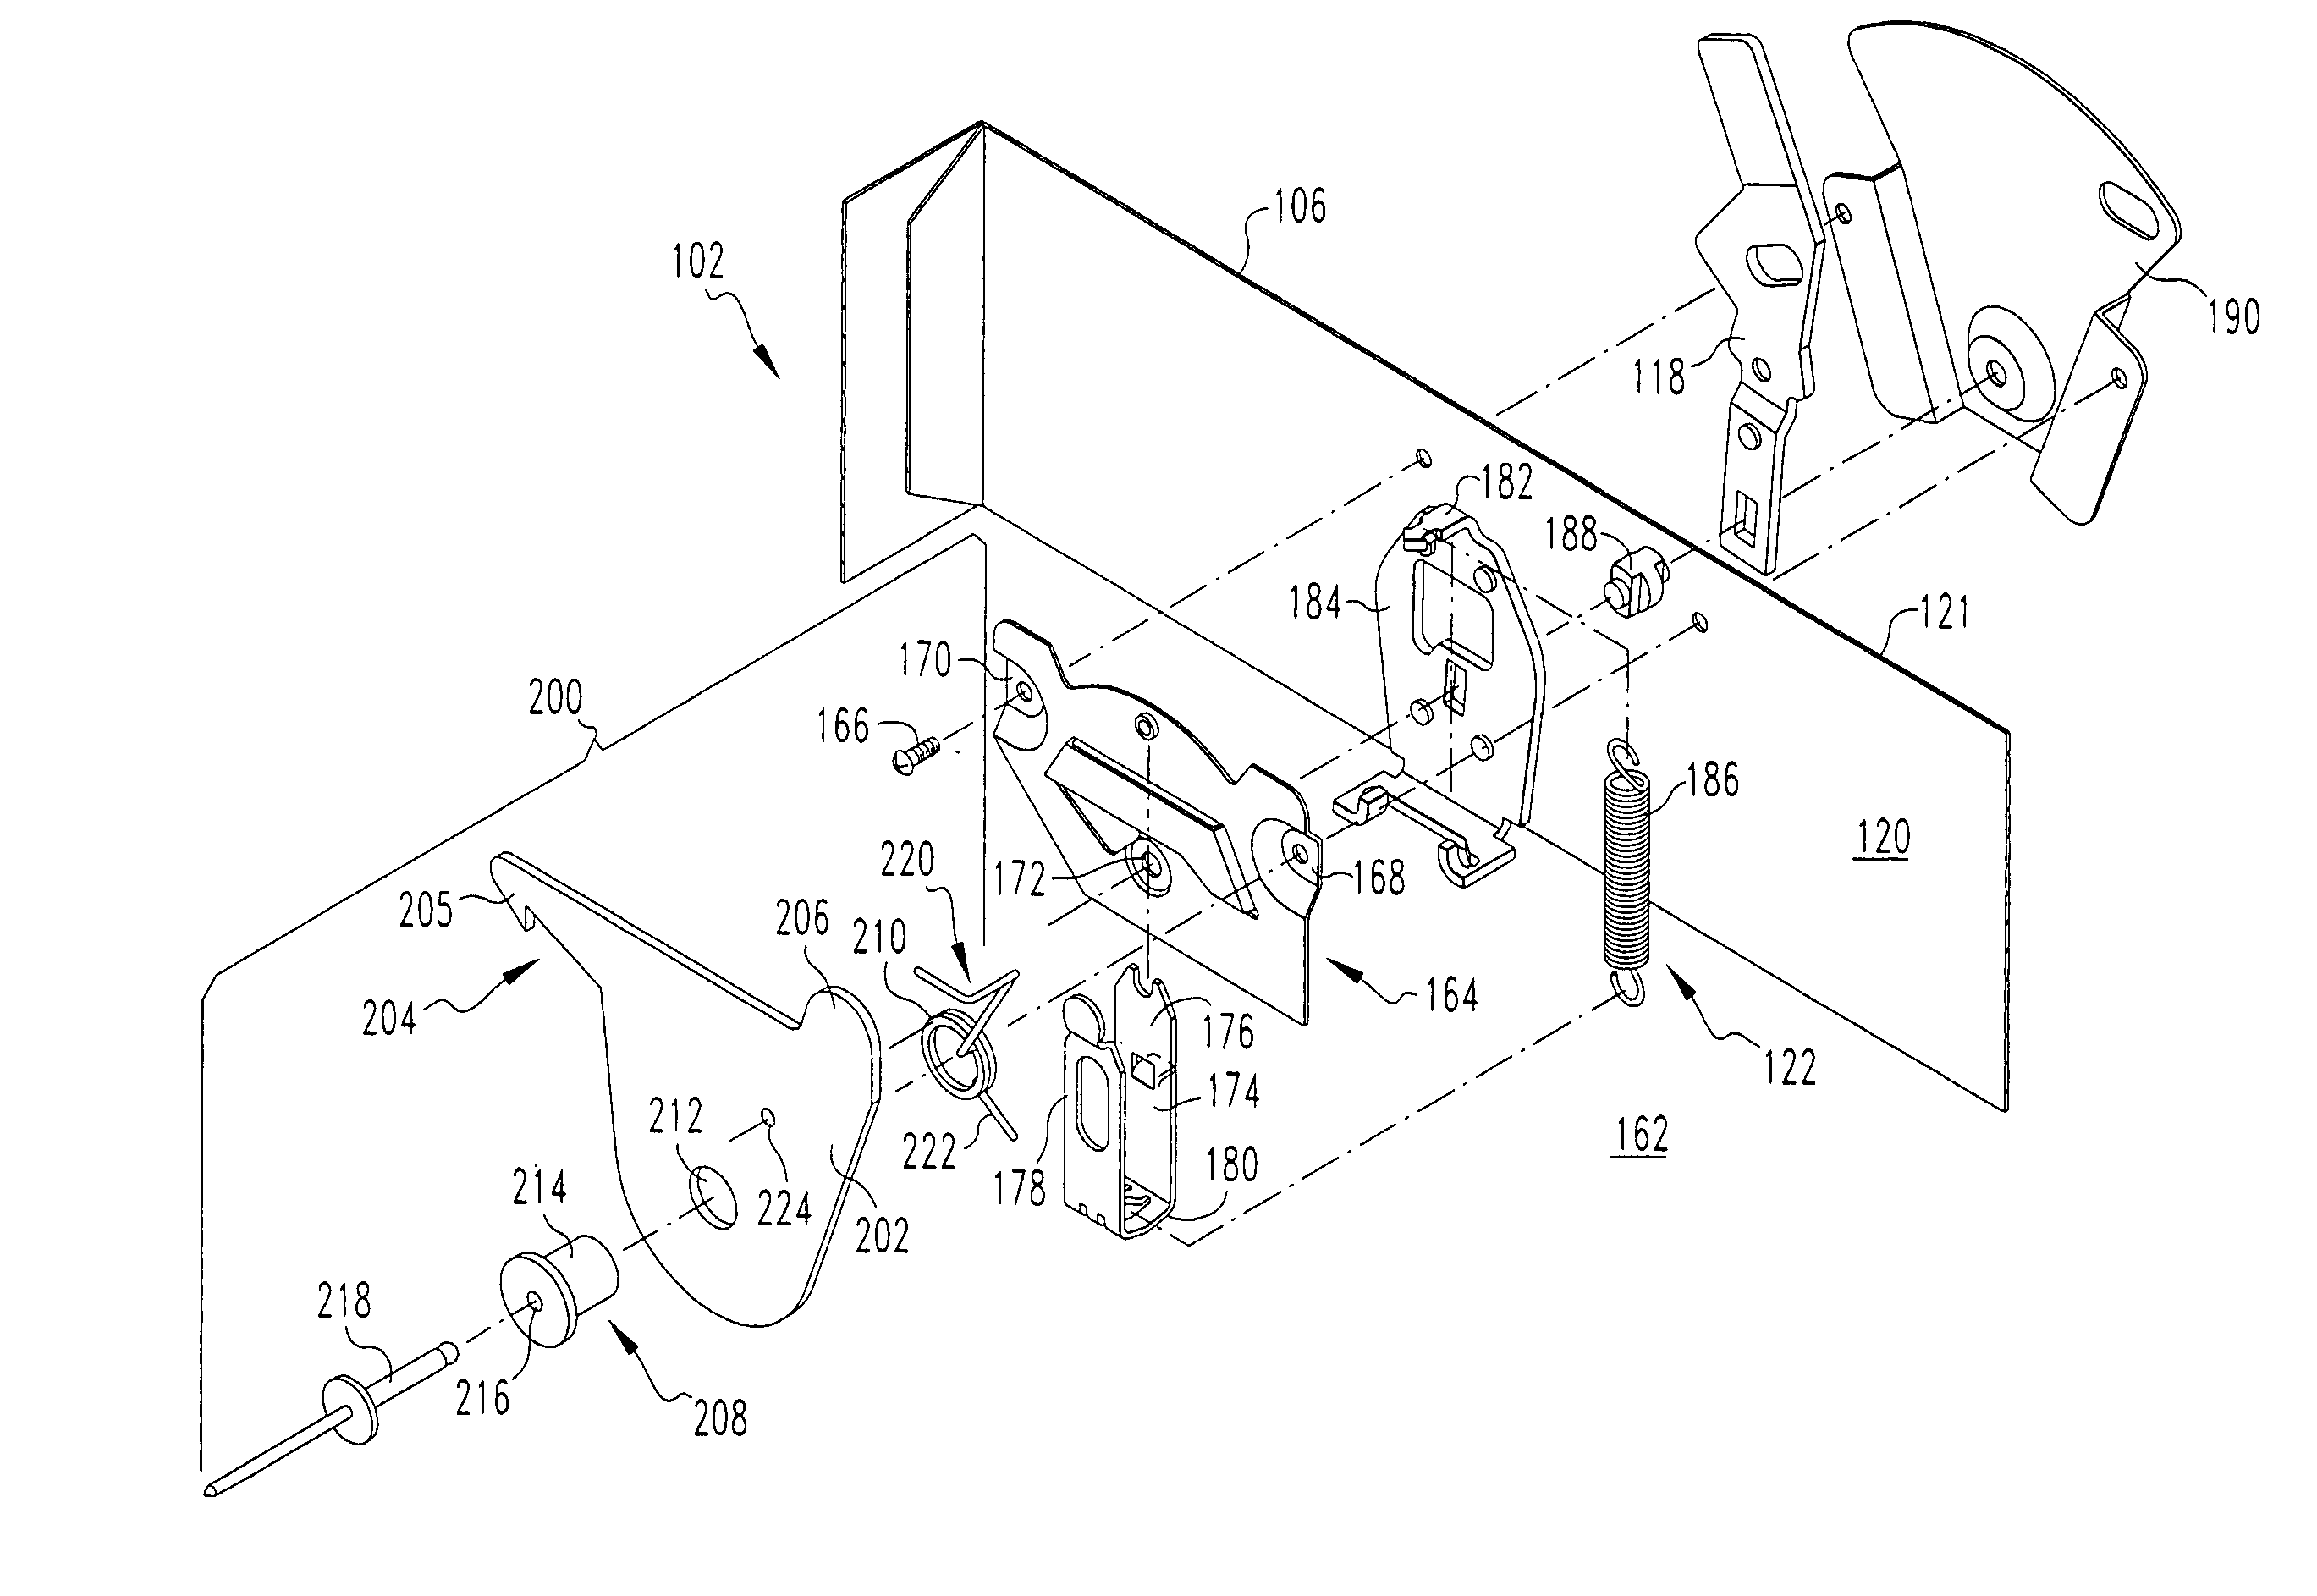 Interlock assembly and safety switch employing the same